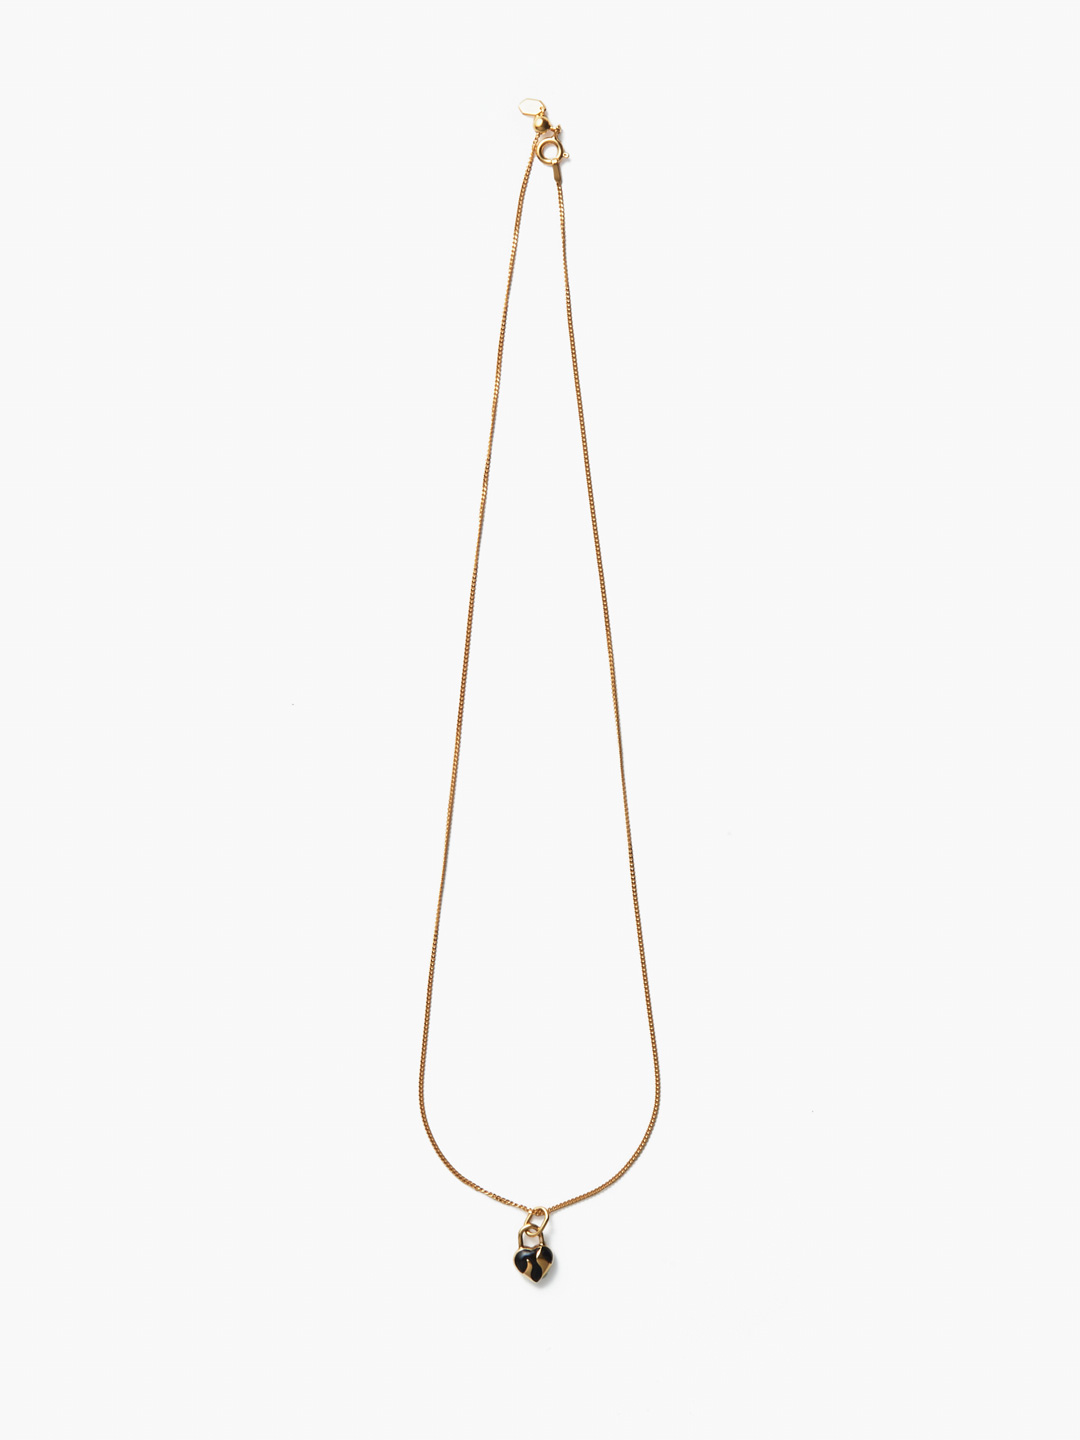 Passion Necklace Black Gold - Yellow Gold